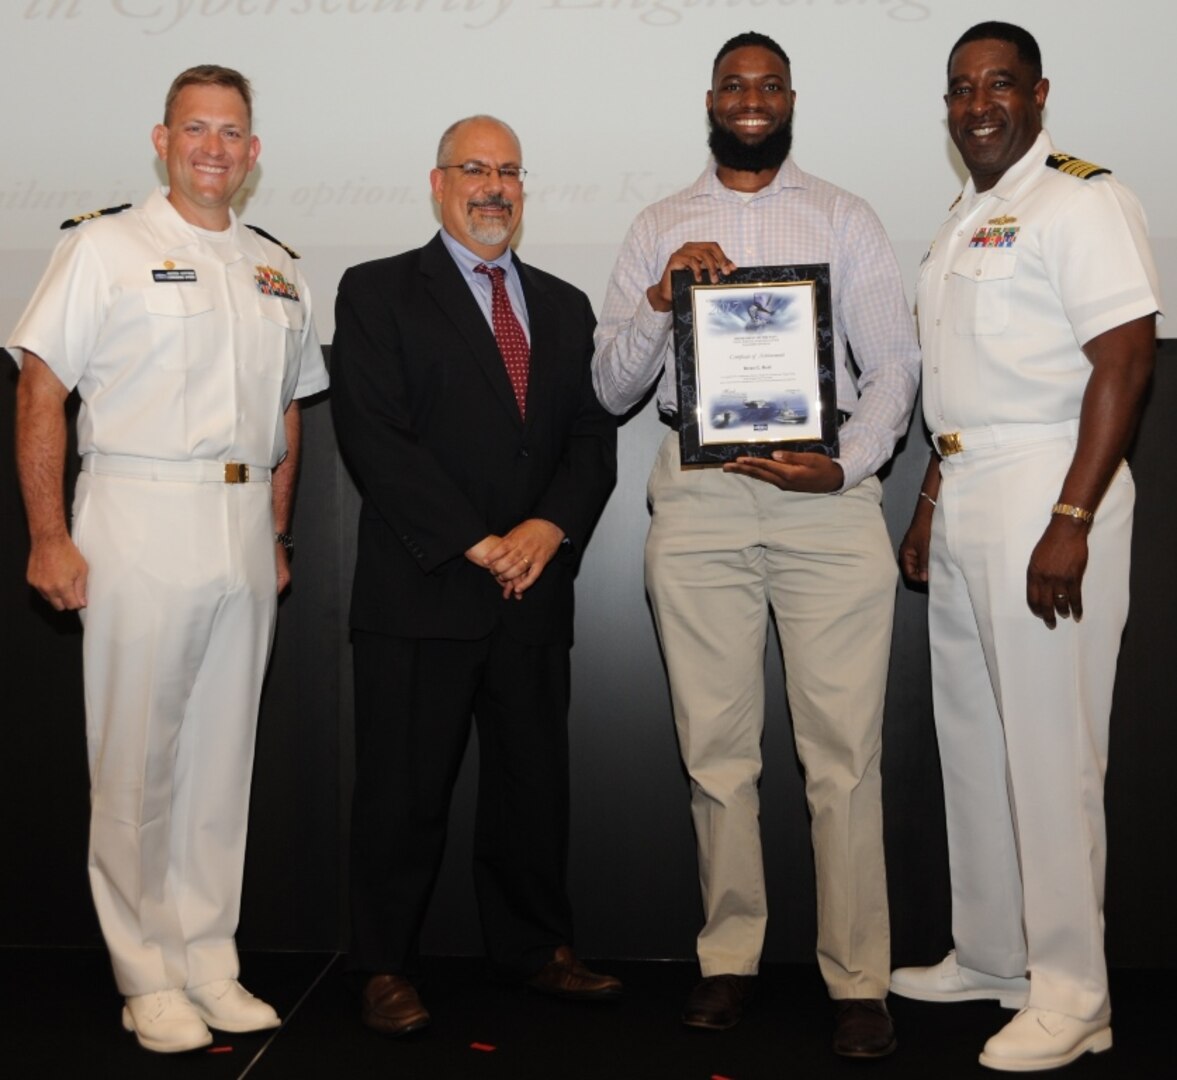 IMAGE: DAHLGREN, Va. - Brent Reid receives his certificate of achievement from Naval Surface Warfare Center Dahlgren Division (NSWCDD) Technical Director John Fiore, NSWCDD Commanding Officer Capt. Godfrey 'Gus' Weekes, right, and Combat Direction Systems Activity Dam Neck Commanding Officer Cmdr. Andrew Hoffman at the 2017 NSWCDD academic awards ceremony. Pasanen was recognized for completing his master's in cybersecurity engineering from Morgan State University, and commended for his commitment to personal and professional development.